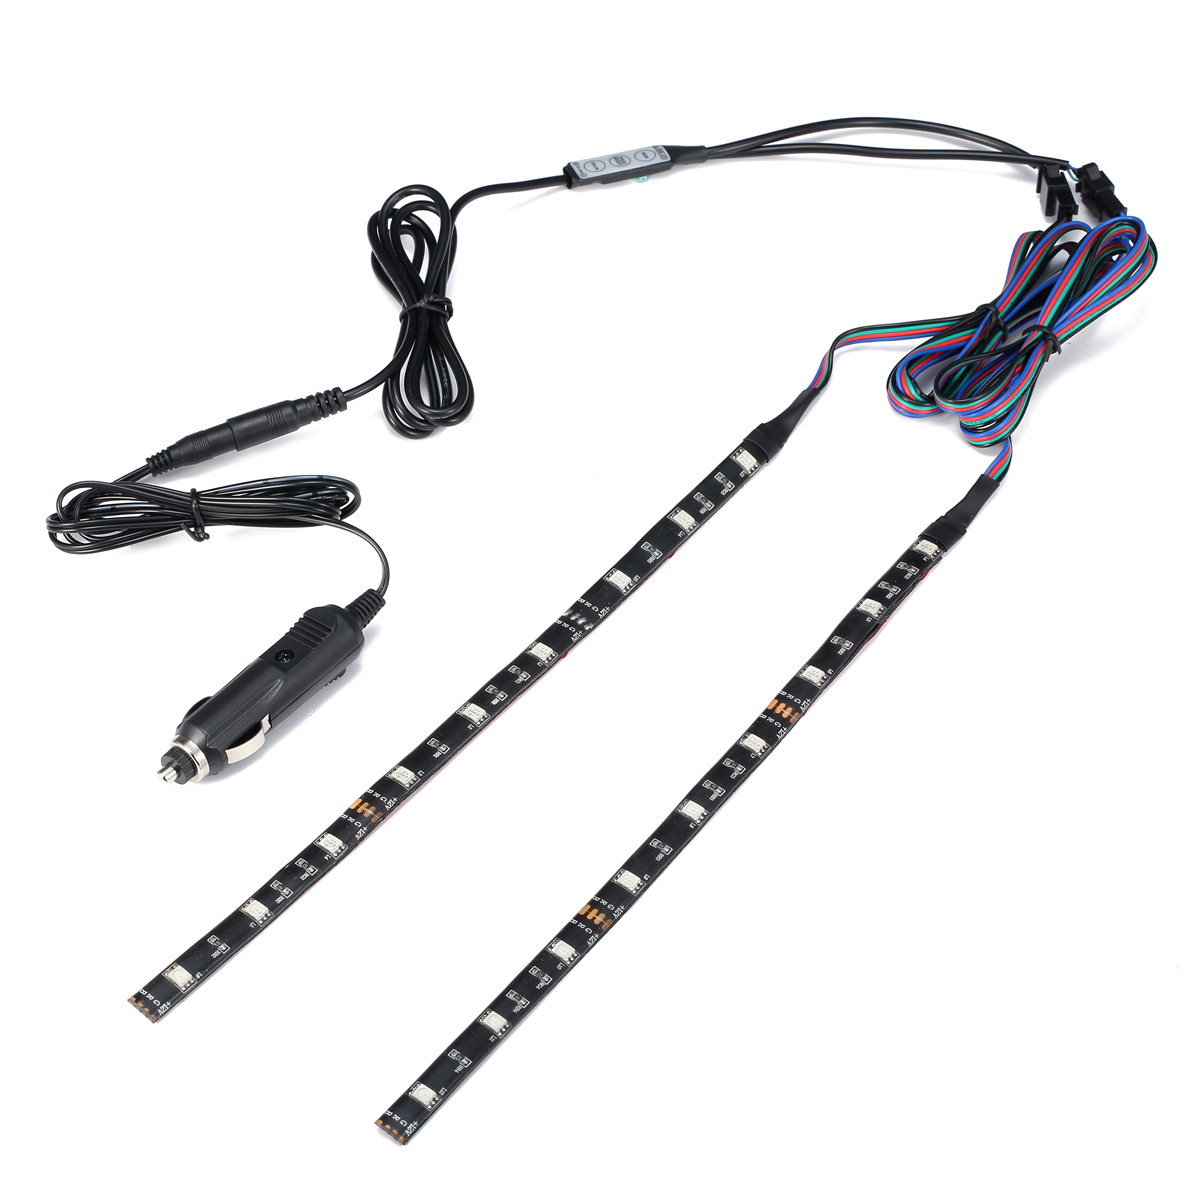 Find 2PCS 30CM 5050 SMD Waterproof RGB LED Strip Light with DC Mini Controller Car Charger DC12V for Sale on Gipsybee.com with cryptocurrencies